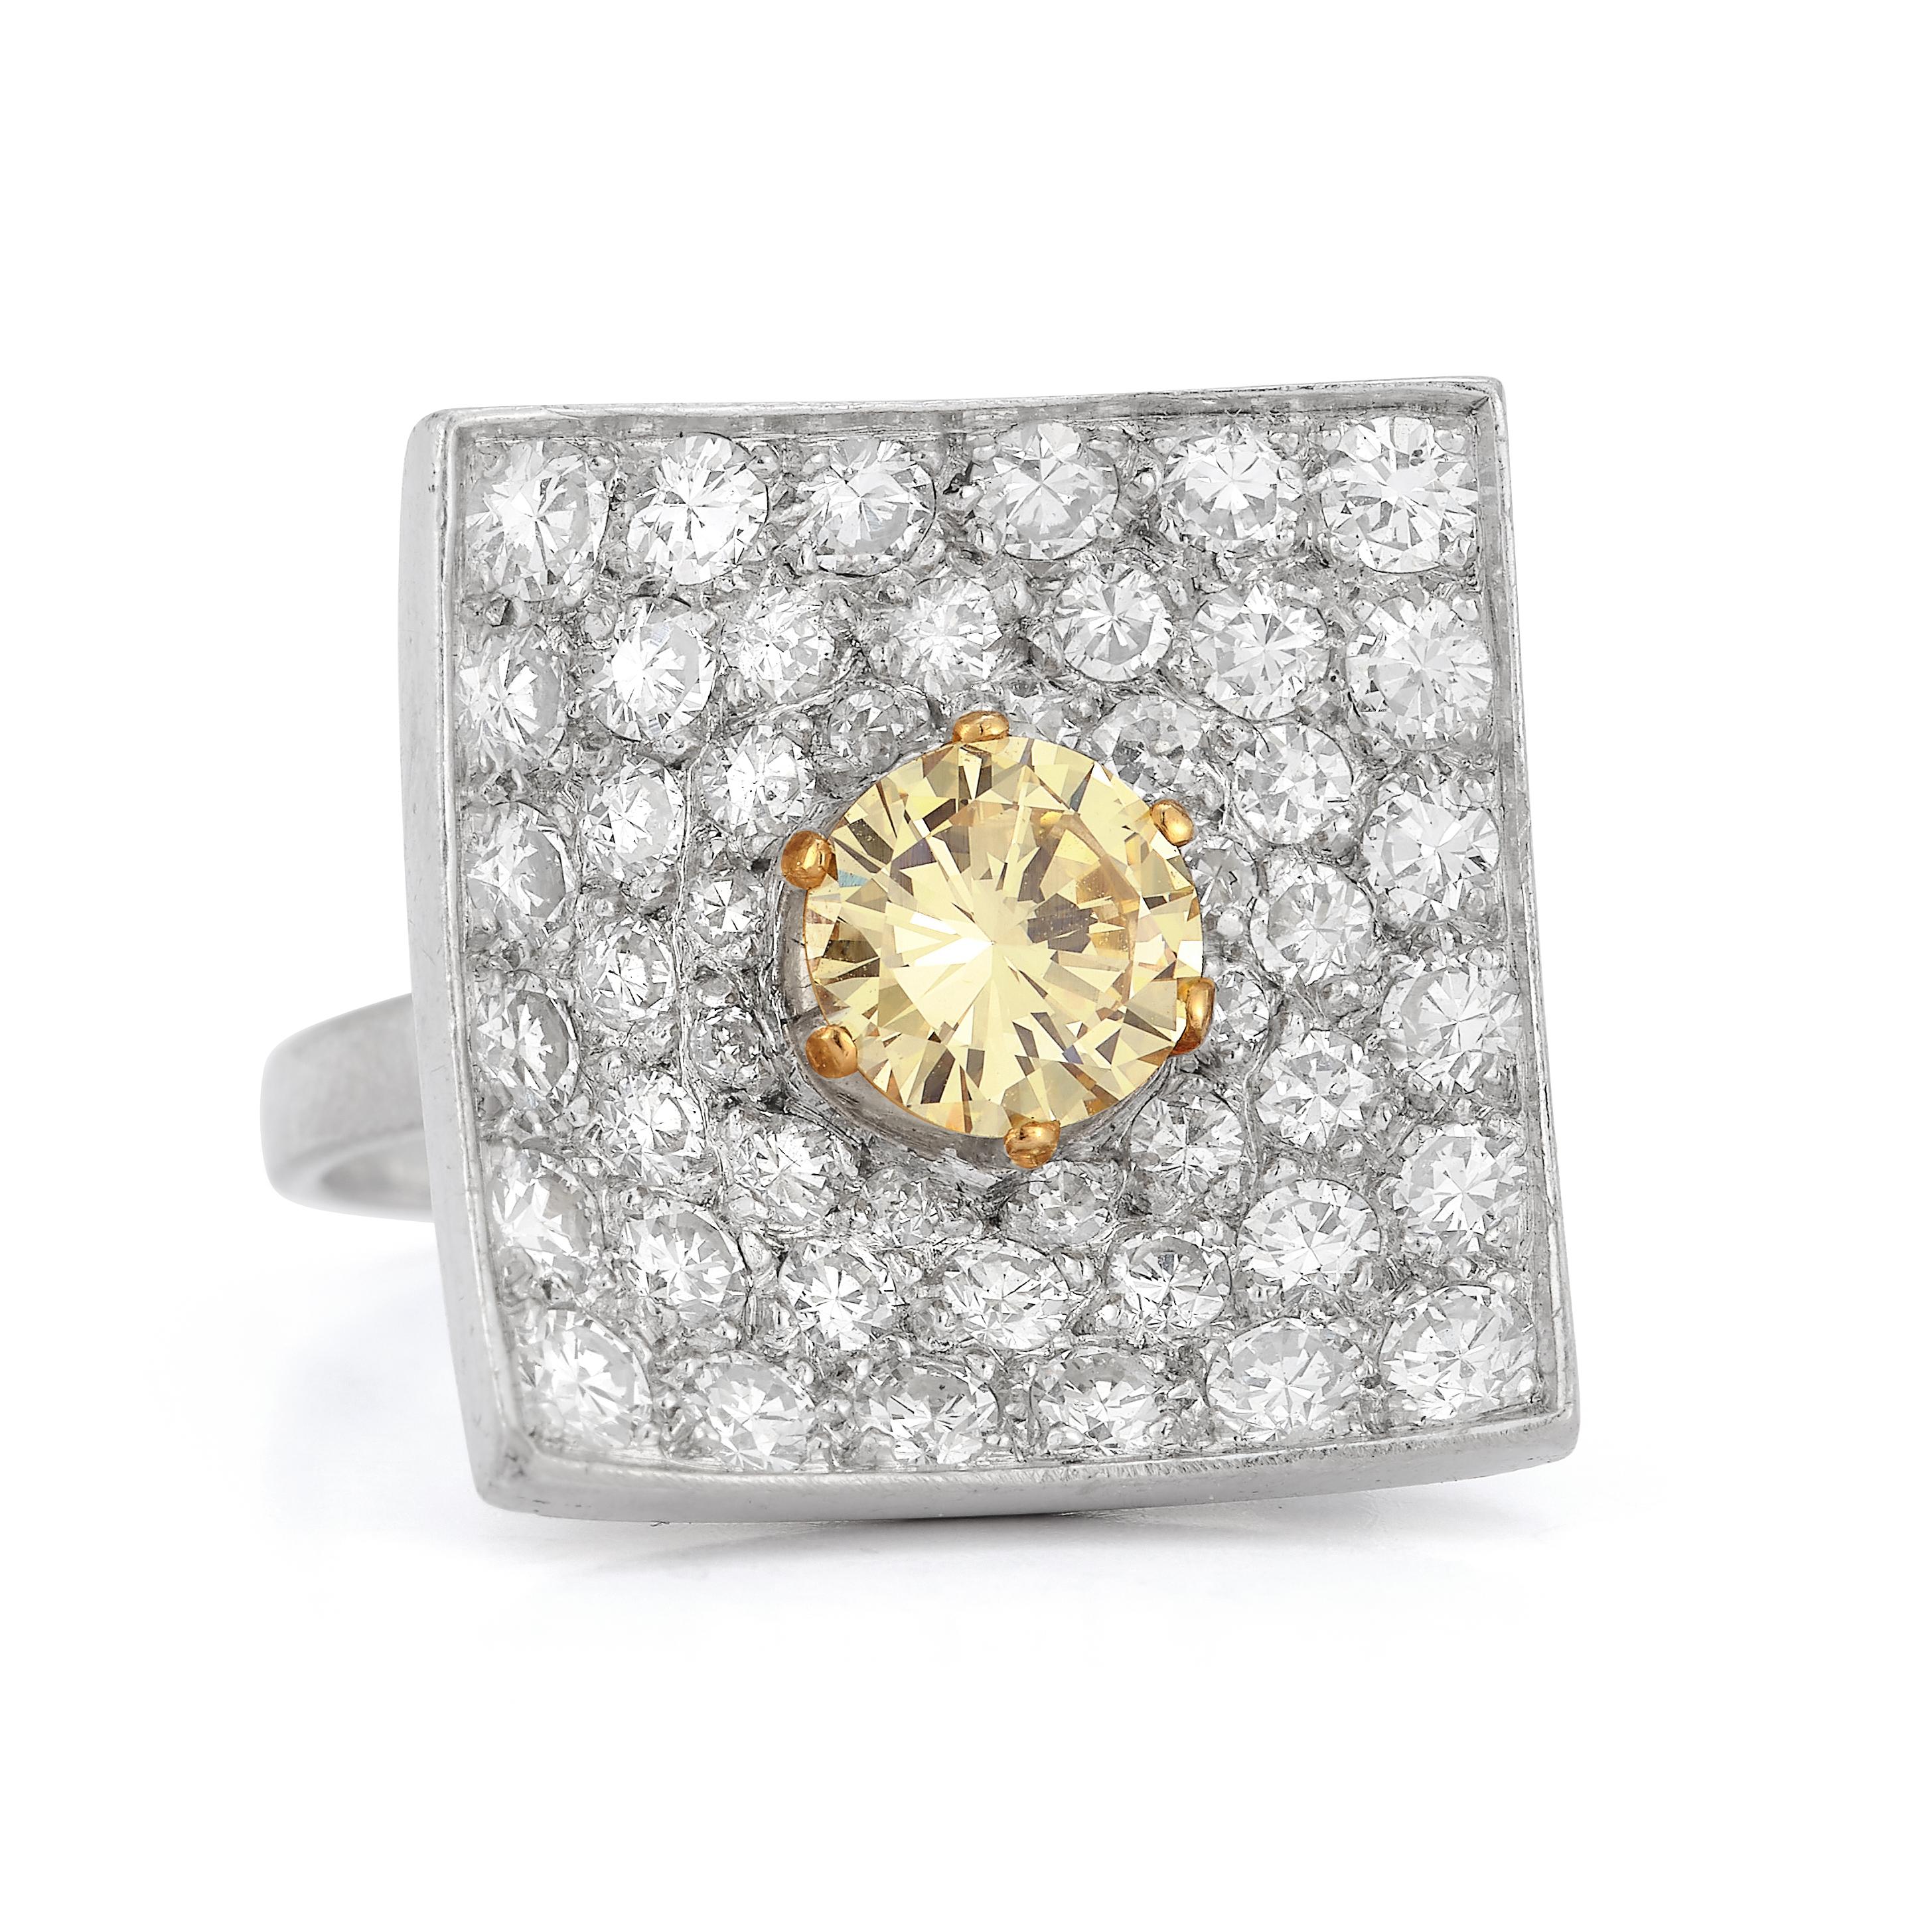 Modernist Square Shaped Yellow Diamond Ring
1 round cut yellow diamond surrounded by white pave diamonds.

Yellow Diamond Approximate Weight: 1.5ct
White Diamonds total approximate Weight:  36.0ct

Ring Size: 6.25

Resizable free of charge 

Metal